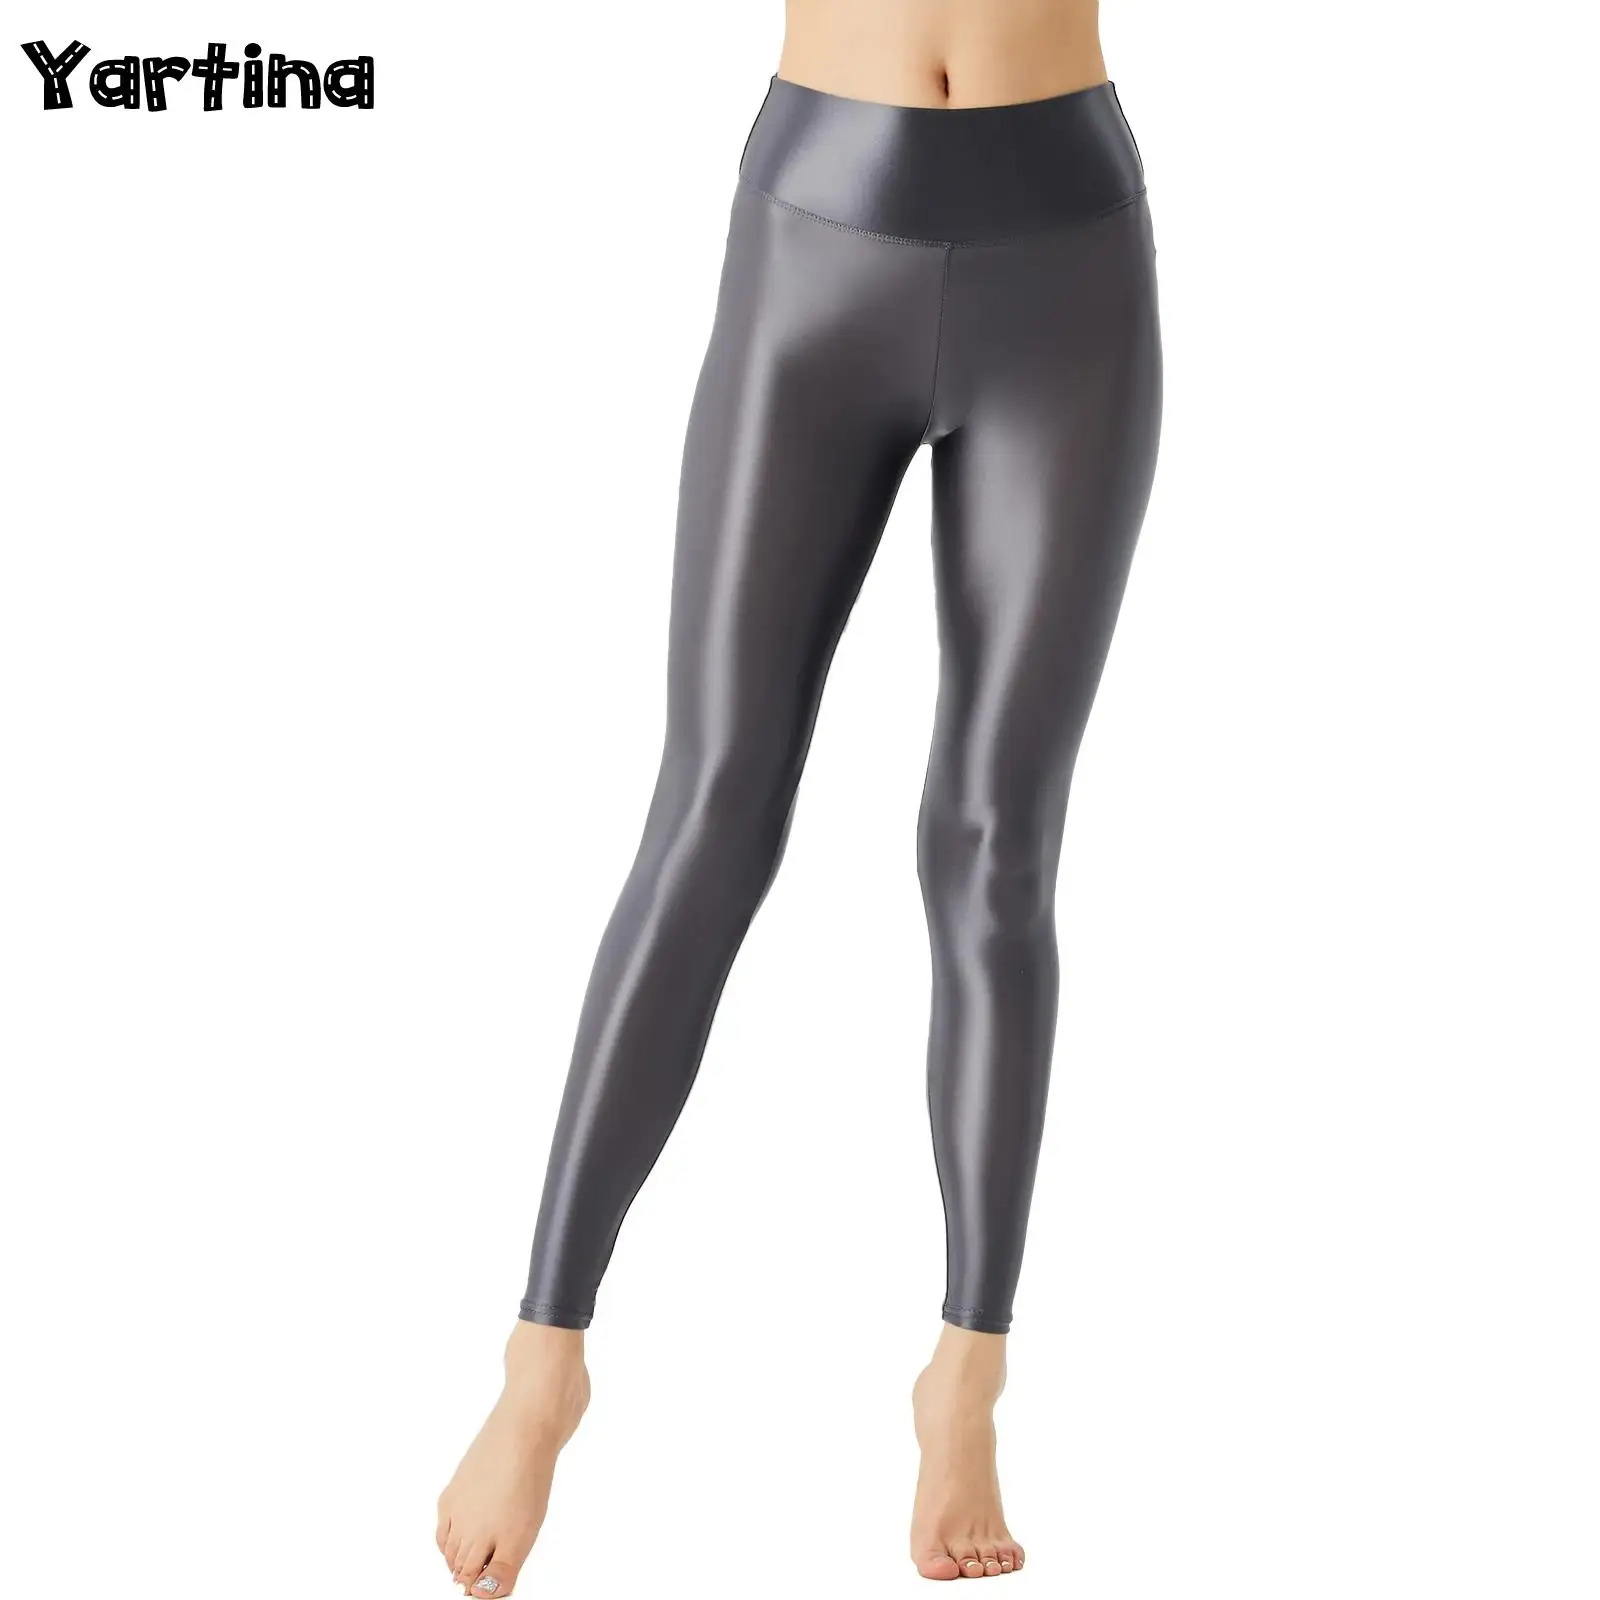 

Womens Solid Color Glossy Stretchy Athletic Pants Leggings for Yoga Pilates Workout Body-Building Exercises Gym Fitness Pants